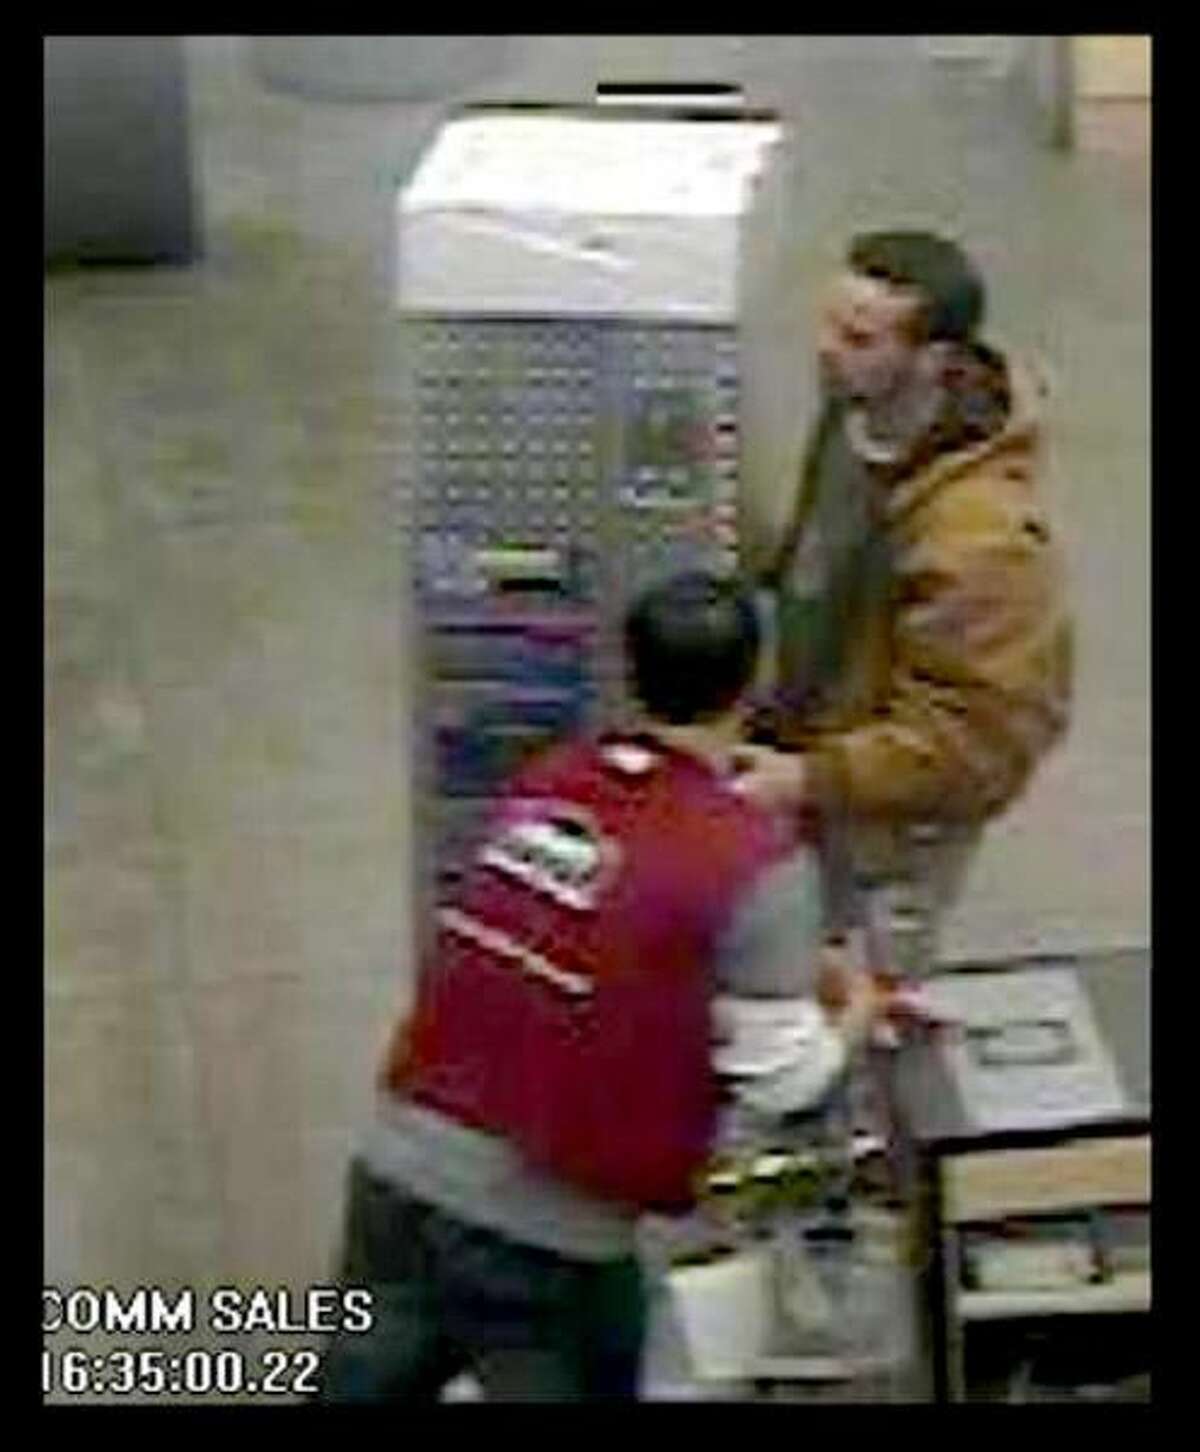 In photo 1 the male is seen leaving the store with a silver pickup truck bed tool box.